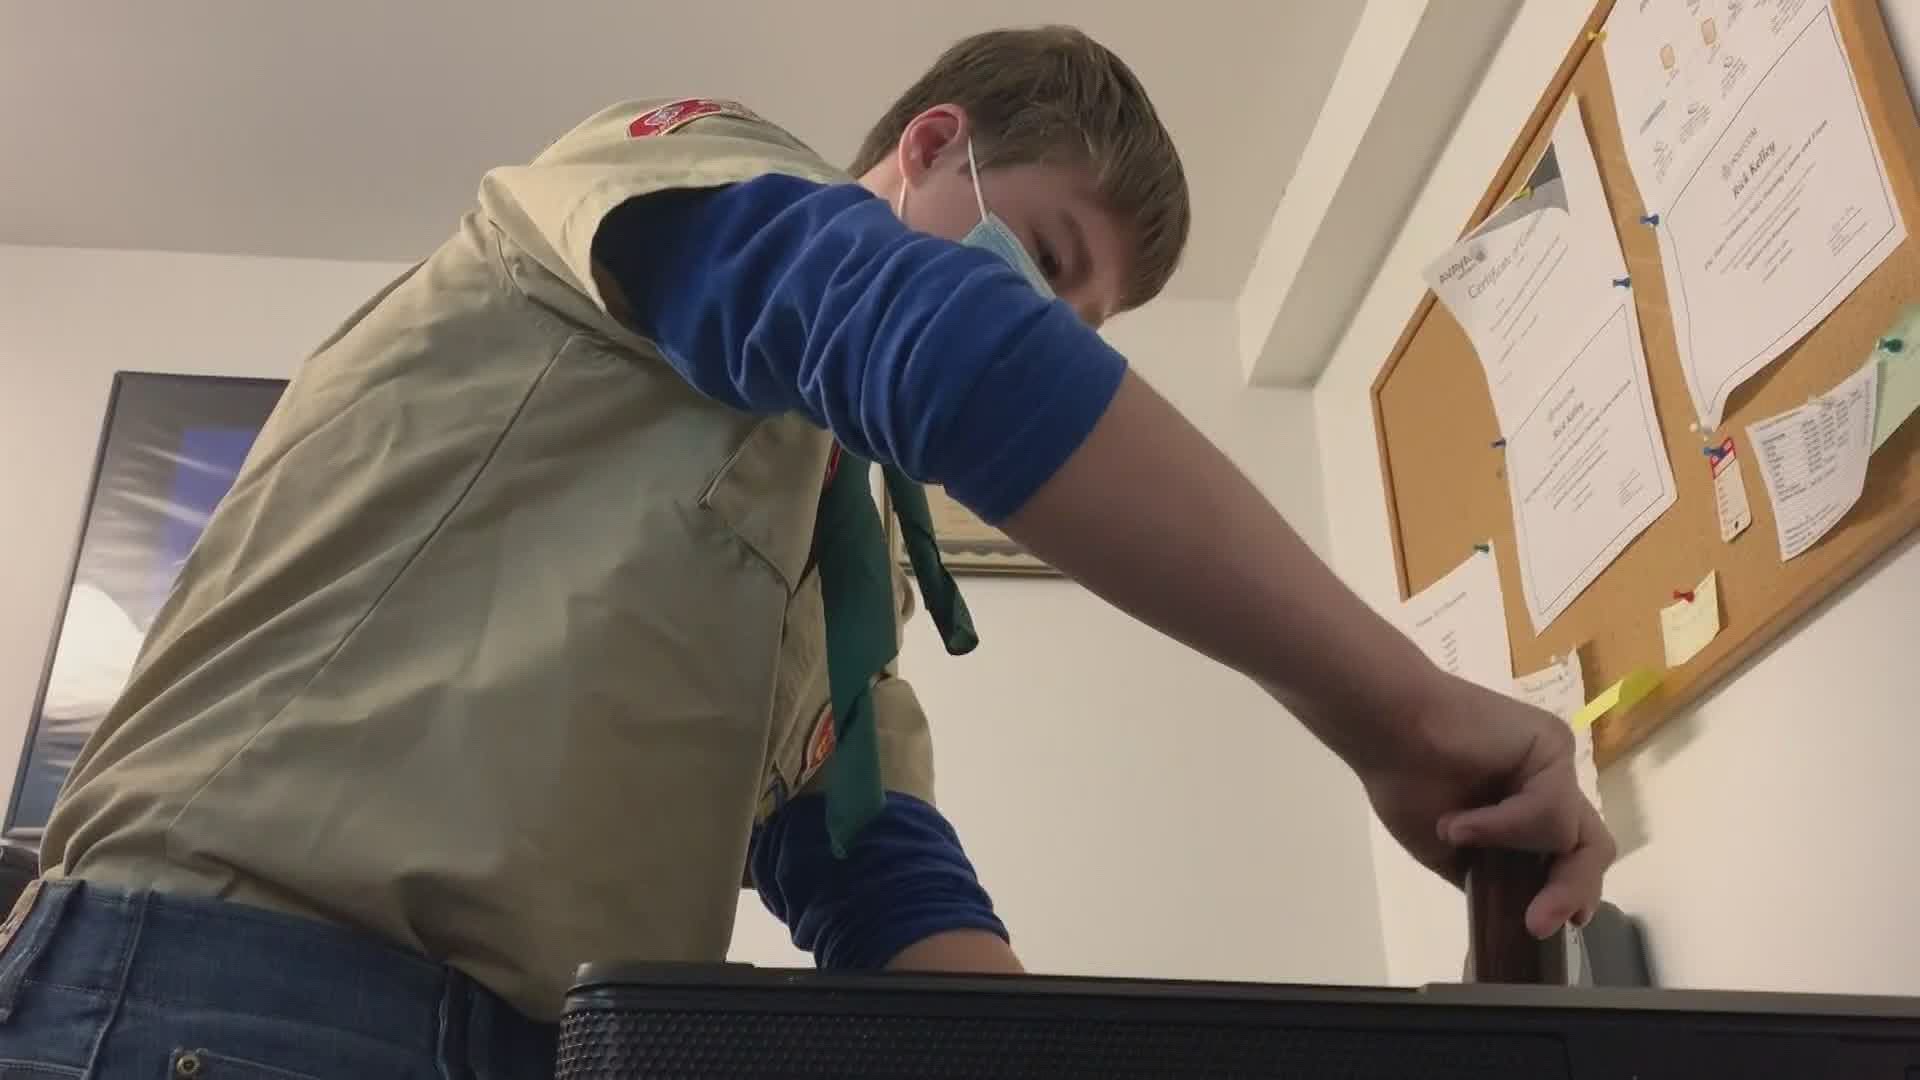 Ryan Kelley has started a program to refurbish donated computers so that they can be distrubuted to those in need in his community.